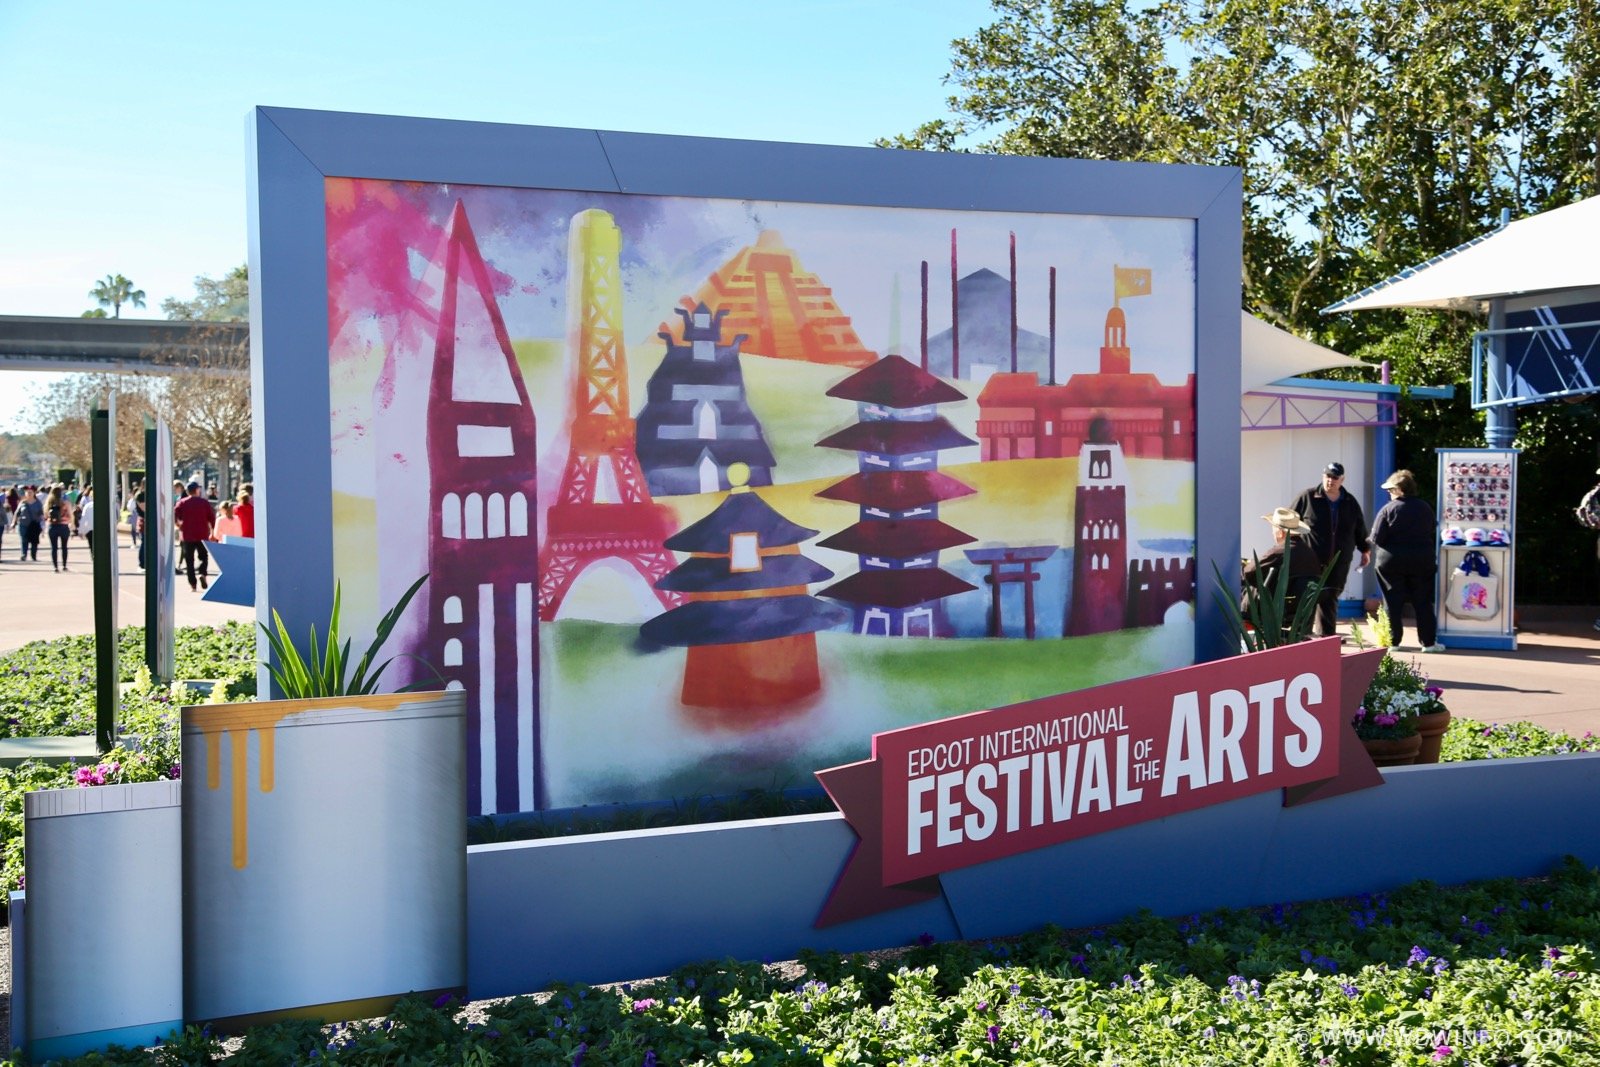 Festival-of-the-Arts-2019-089